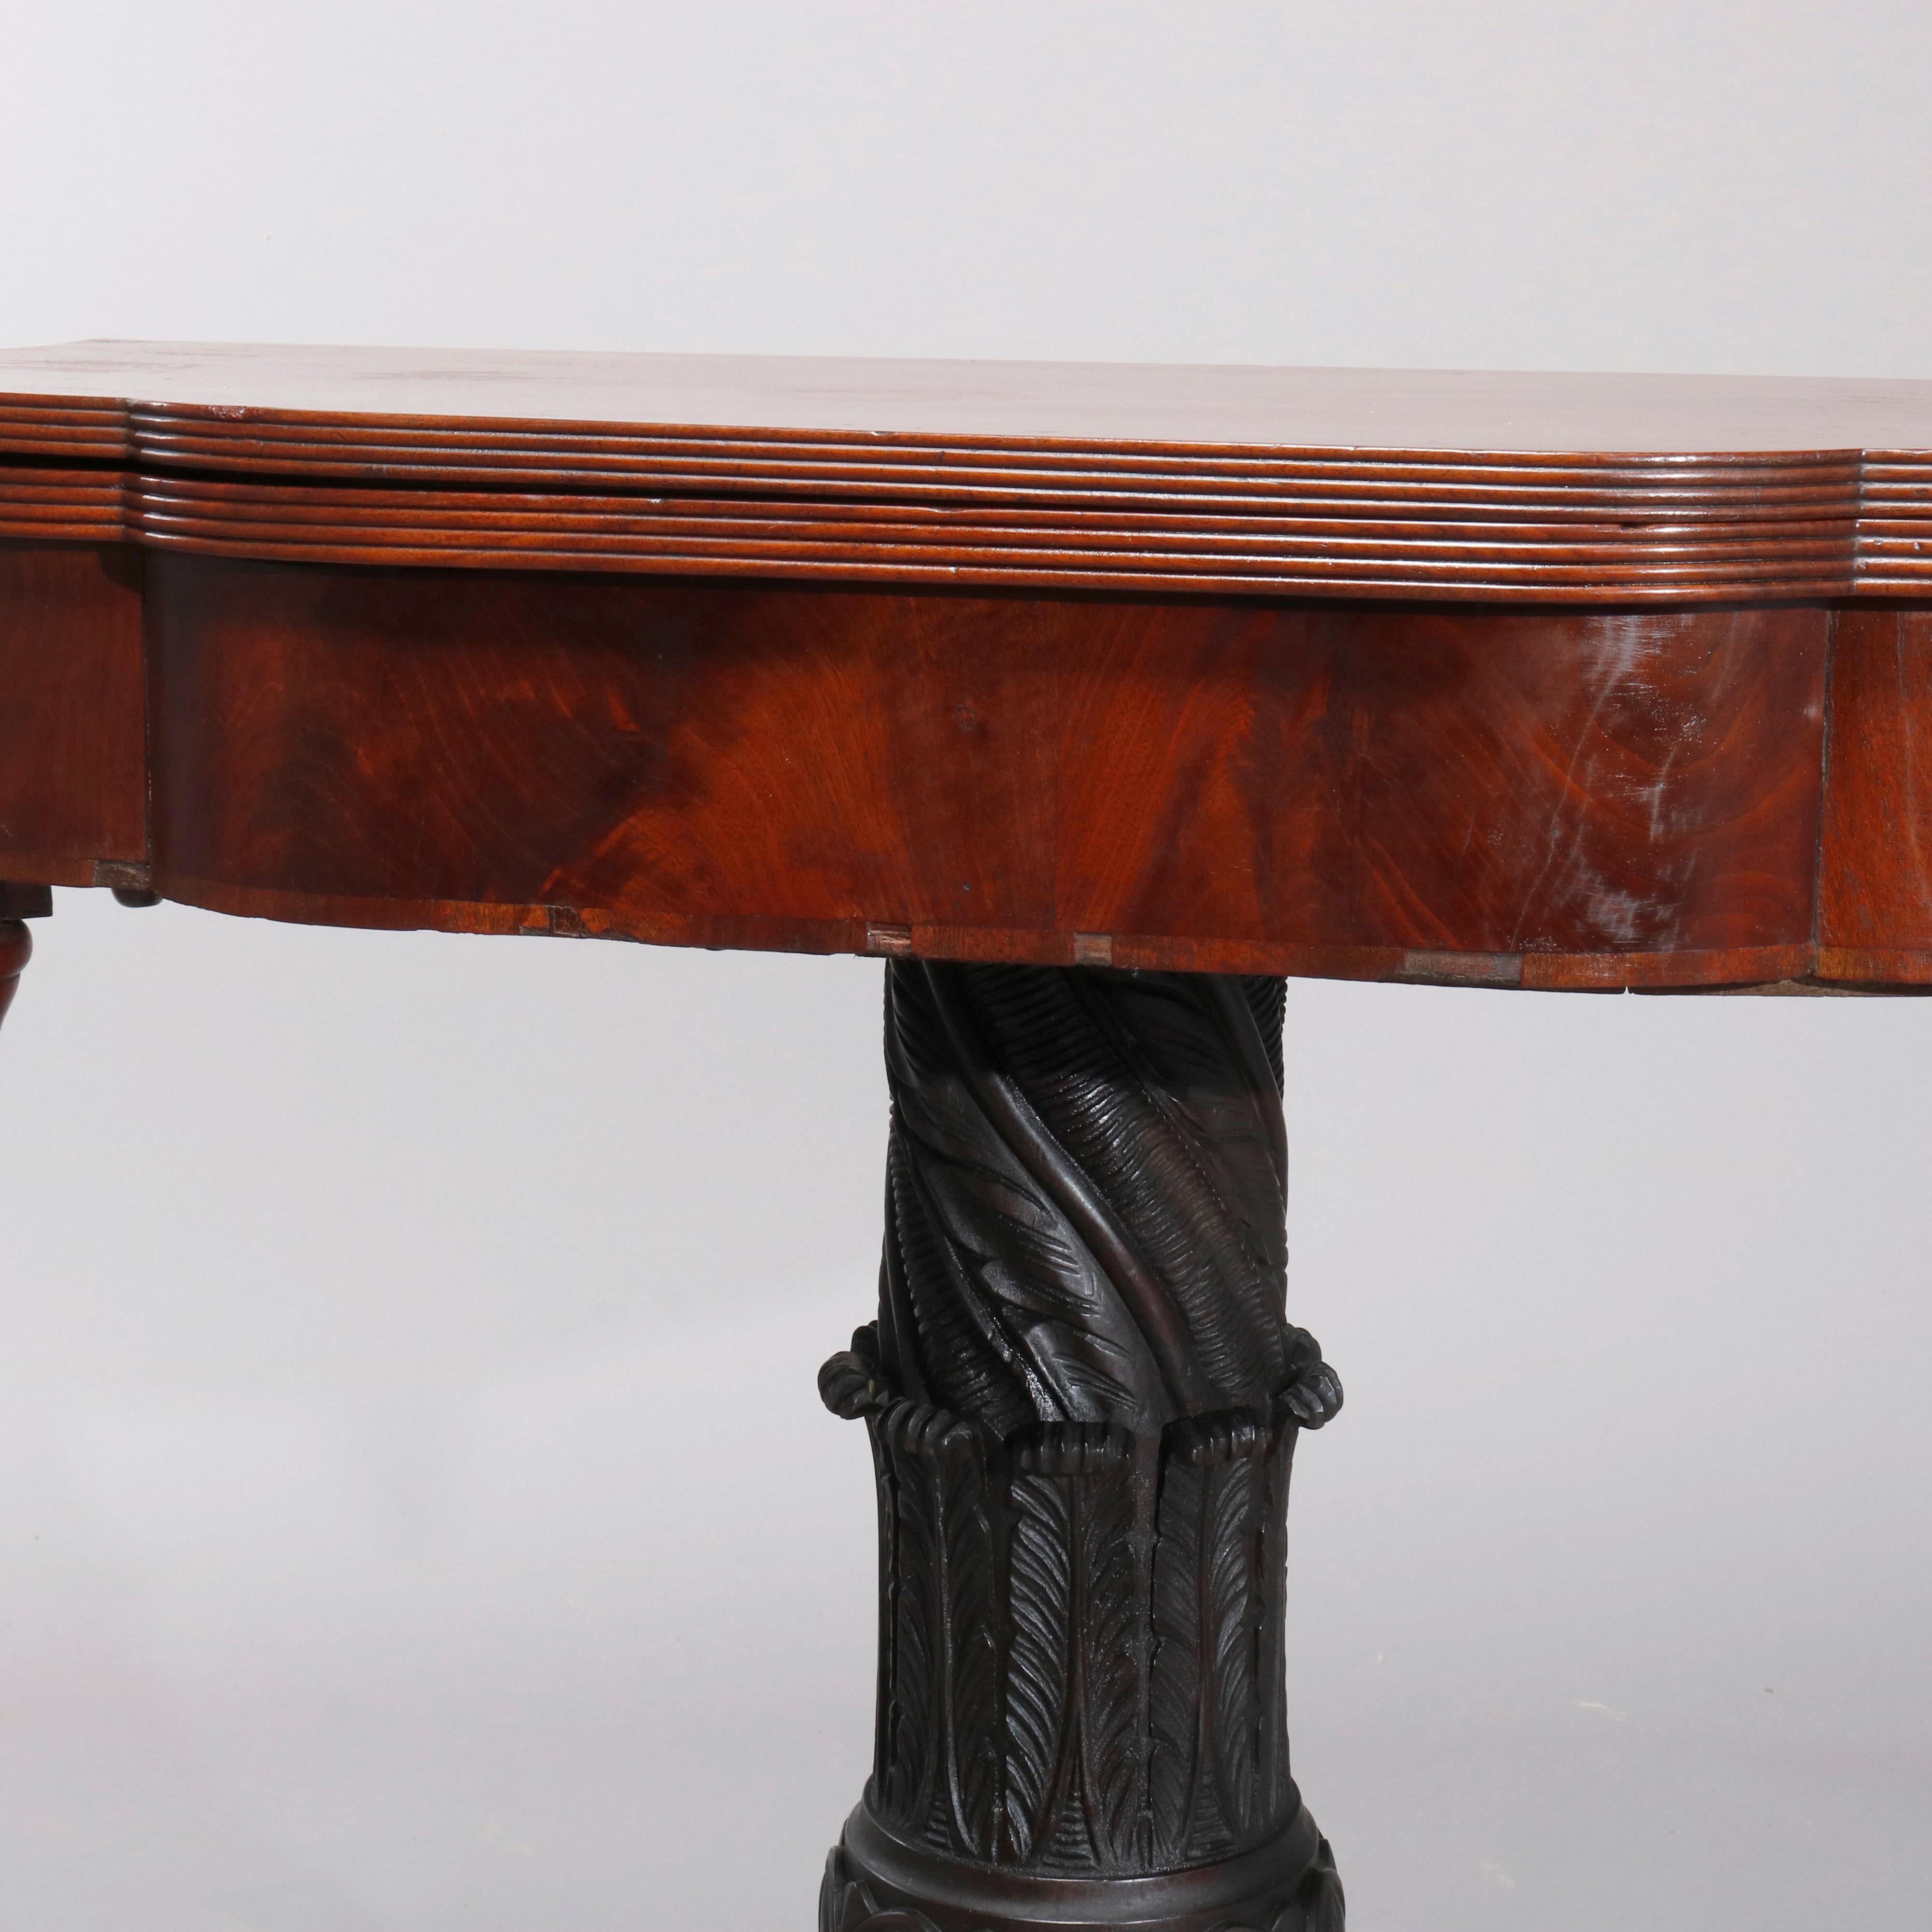 Antique American Empire Deeply Carved Flame Mahogany Game Table, circa 1840 8